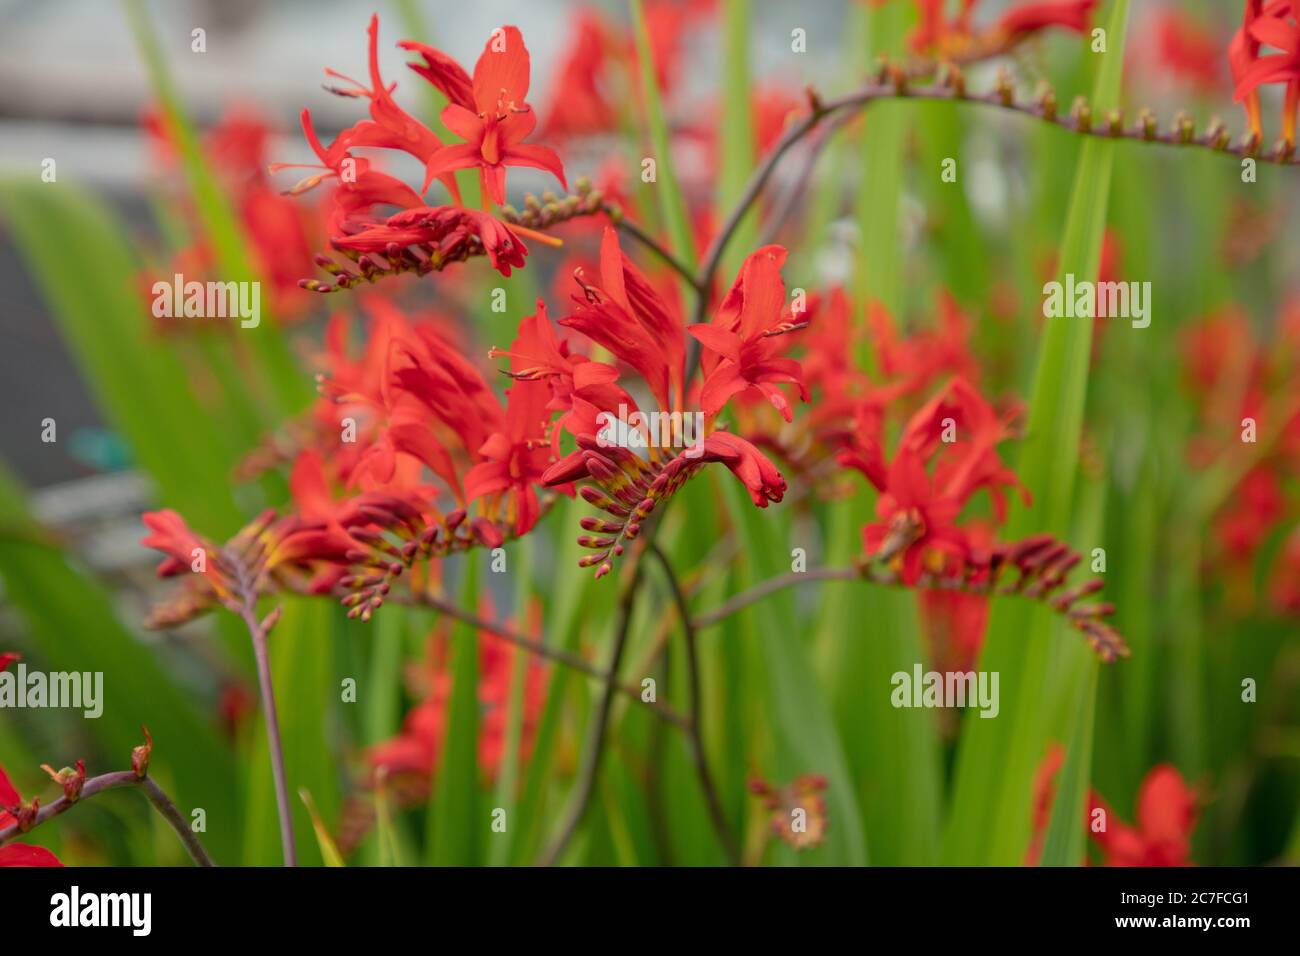 Brilliant flame red flowers of the summer flowering Crocosmia Lucifer seen in the garden. Stock Photo